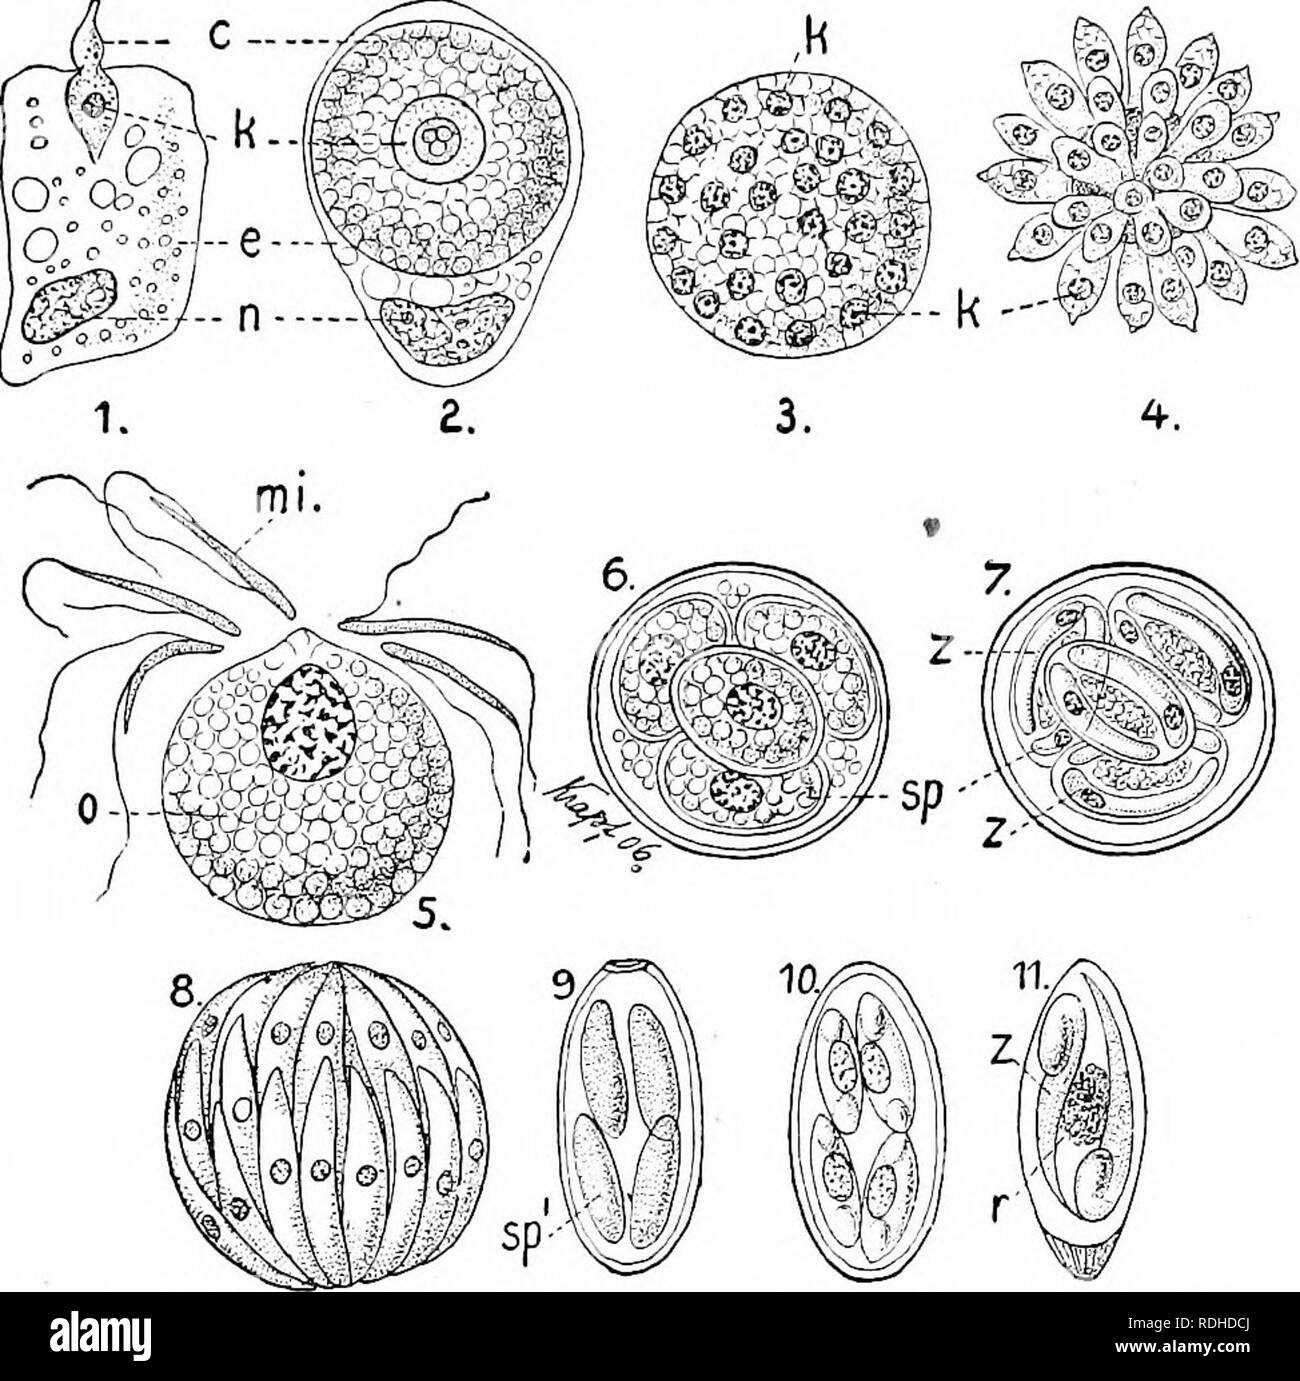 . A manual of zoology. Zoology. 111. SPOROZOA: HiEMOSPHORIDA 189. Fig. 146.â1-7. Develupmentof Coccidium schuhetgi (afterSthaudinn). i, entrance of sporozoites in cell; 2, its growth: 3, nuclear multiplication; 4, division into mero- zoites; 5, macro- and microgametes; 5, zygote diided into four sporozoites. 8-11, Emeria stieda: (after WasieleÂ«sky und Metzner). 8, autoinfection (progamic increase); 9, formation of sporobLists, 10, change of spores into sporozoites; 11, spore &quot;with t^^â o sporozoites, more enlarged; c, s, sporozoite; e, epithelial cell; k, n, nucleus; nn, micro- gamete;  Stock Photo